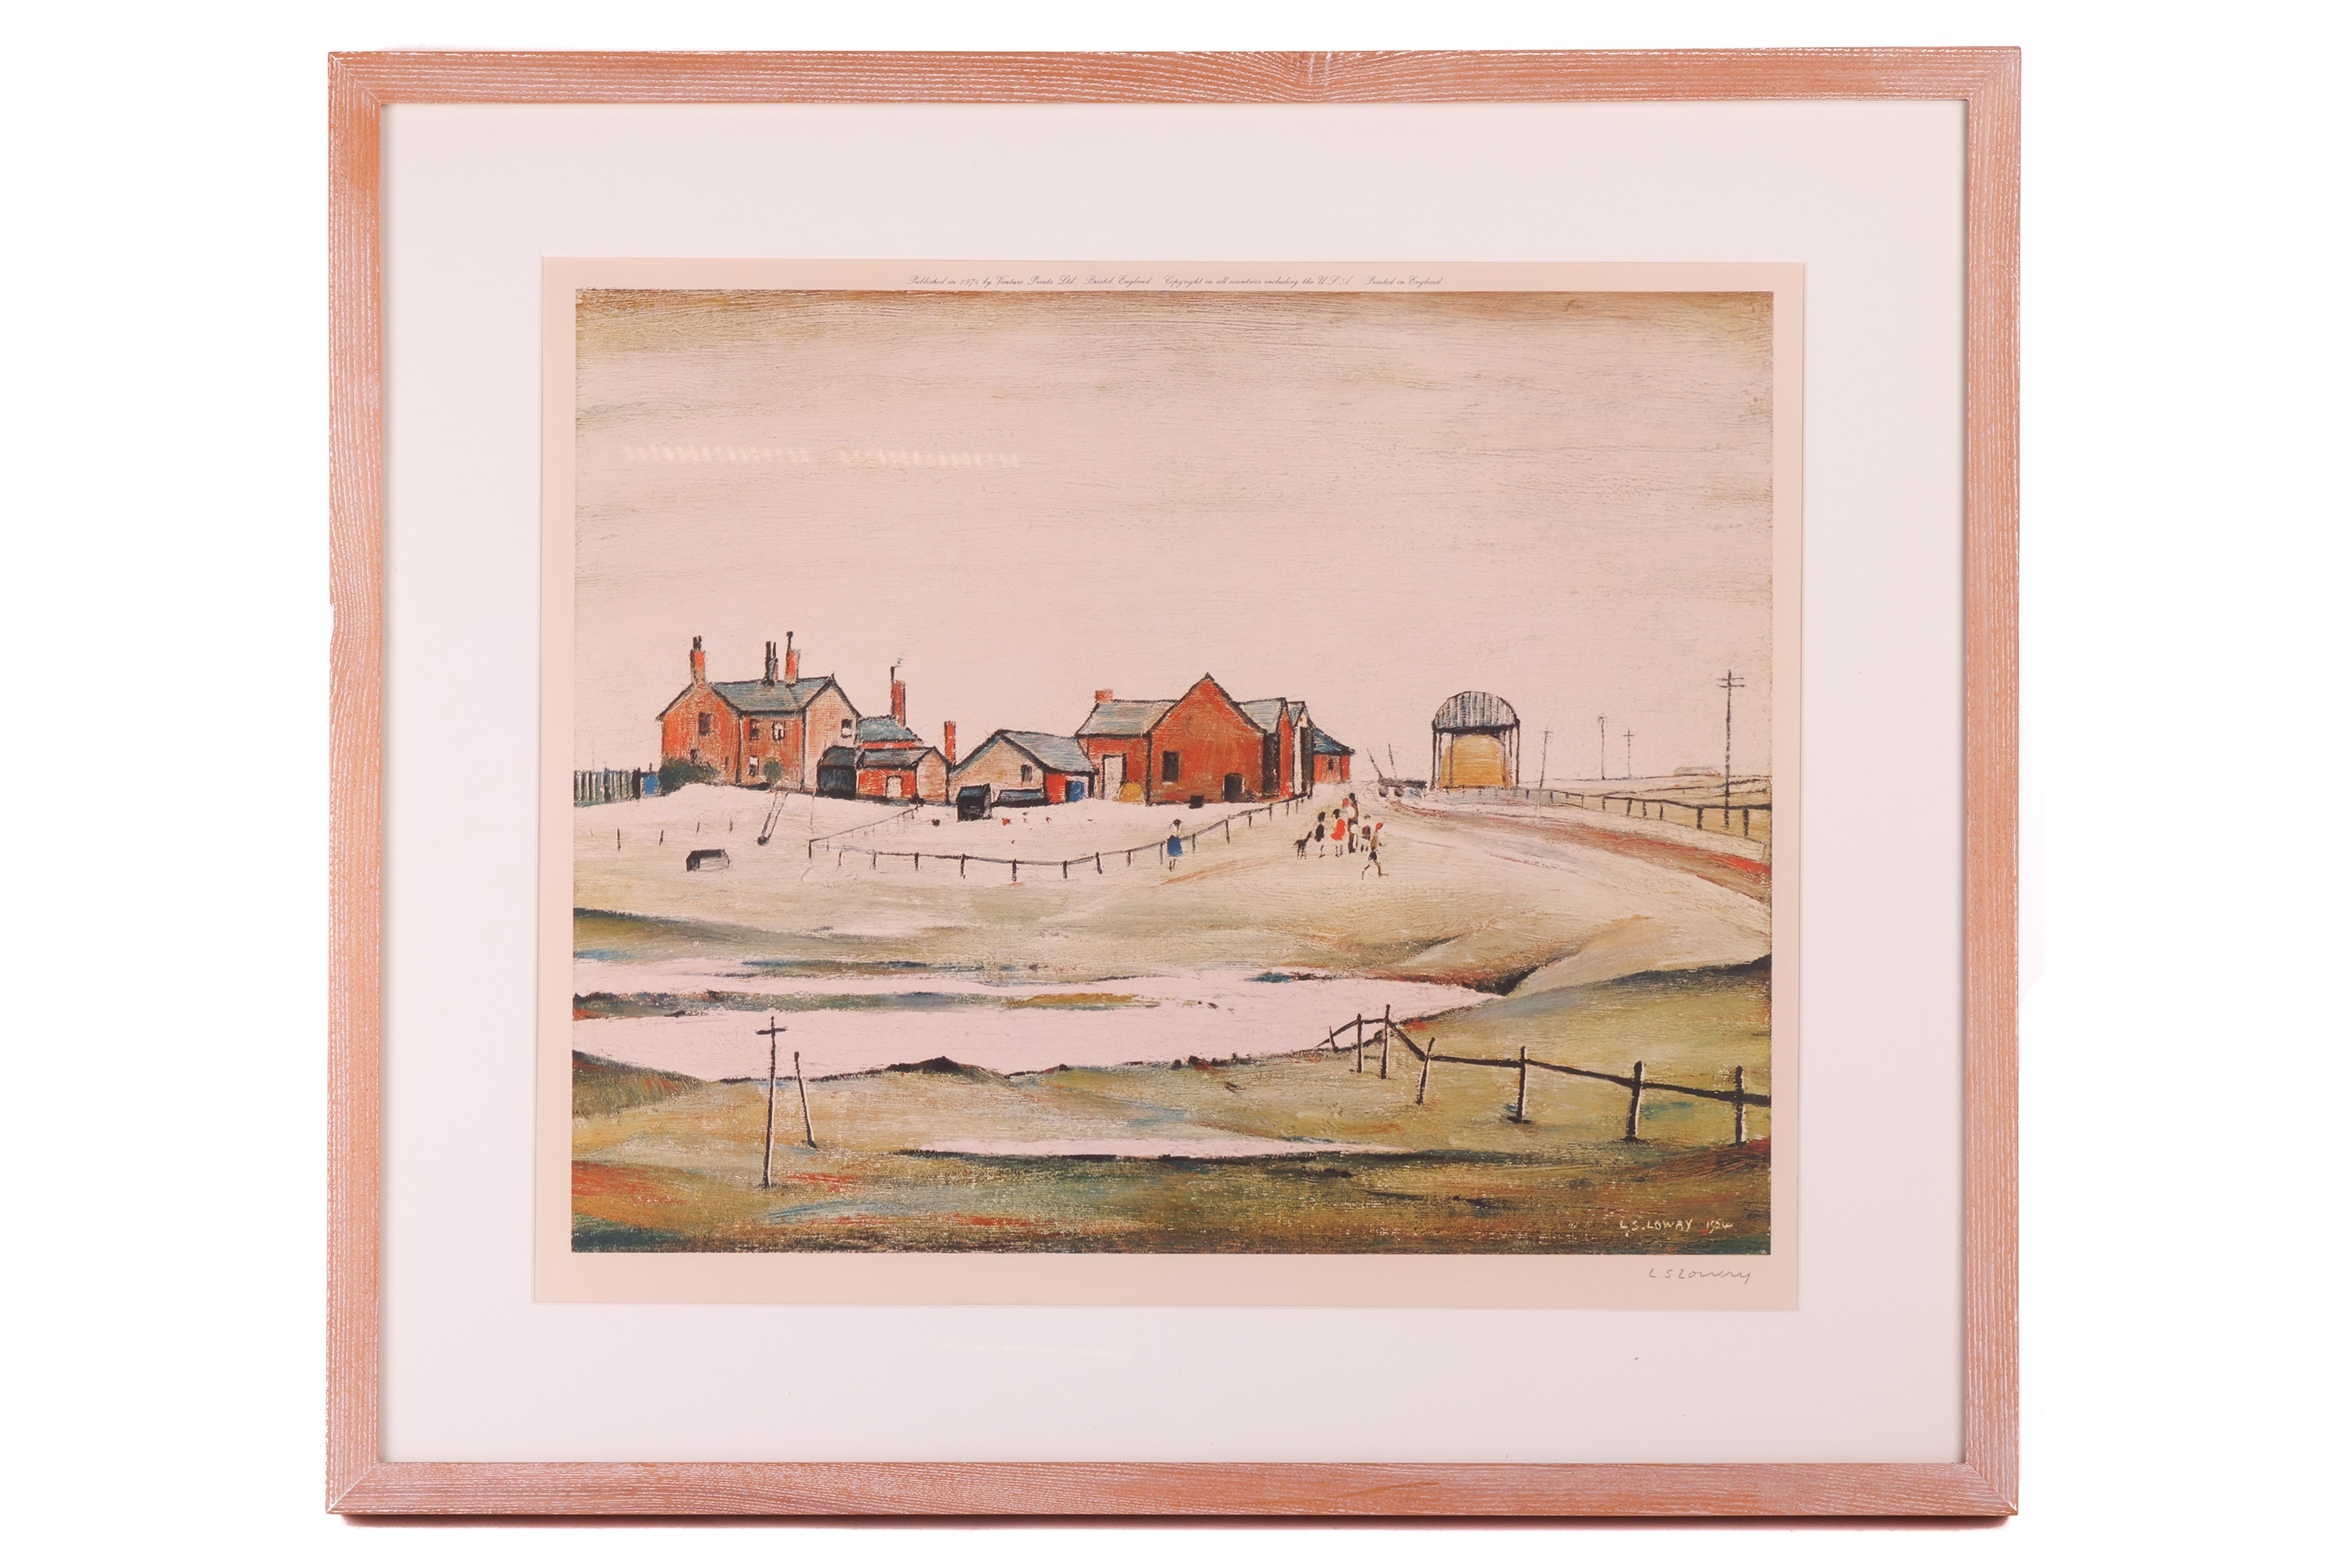 Landscape with Farm Buildings - Laurence Stephen Lowry